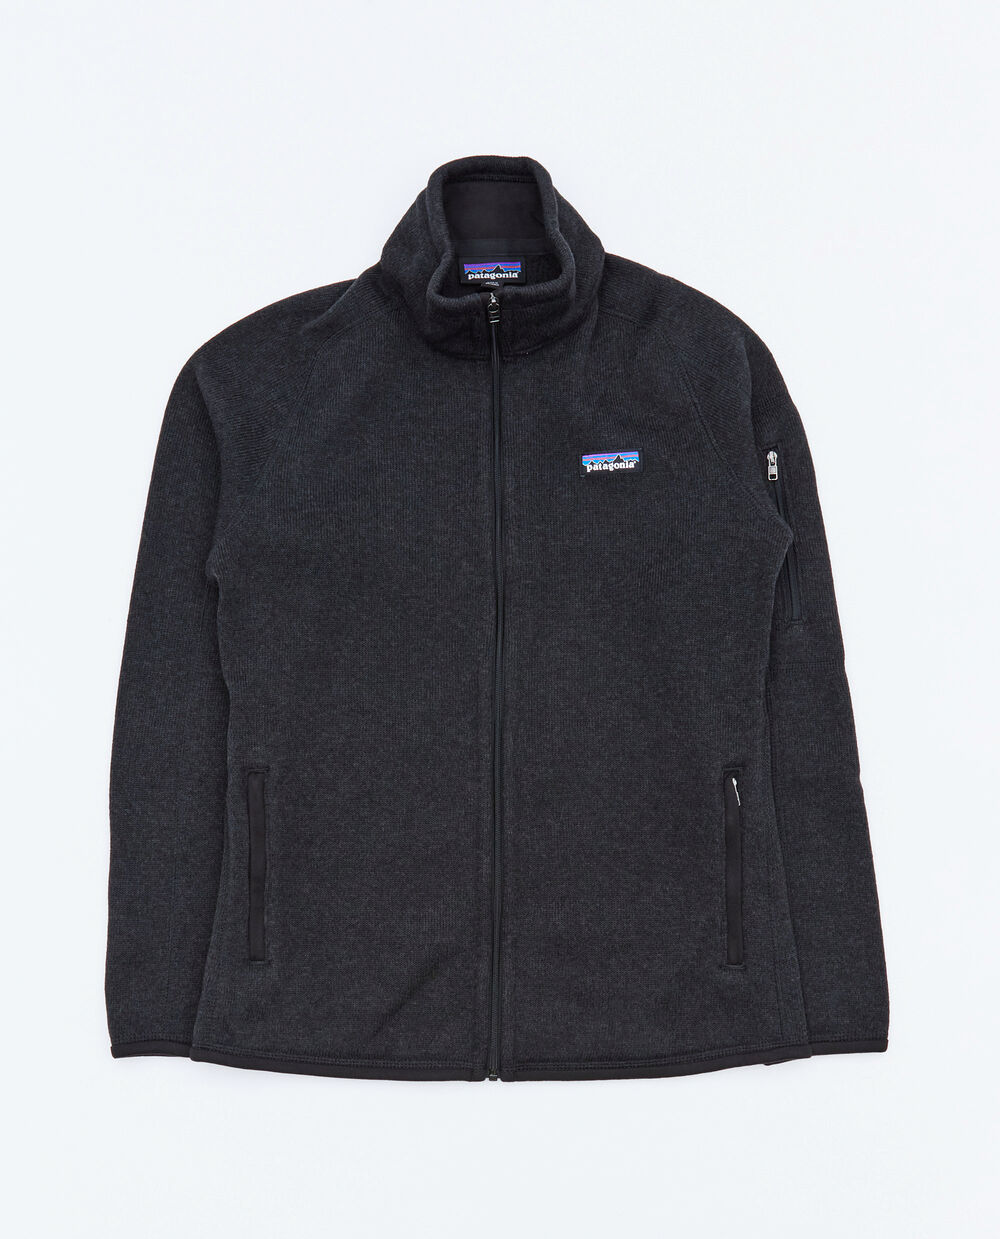 PATAGONIA W'S BETTER SWEATER JKT